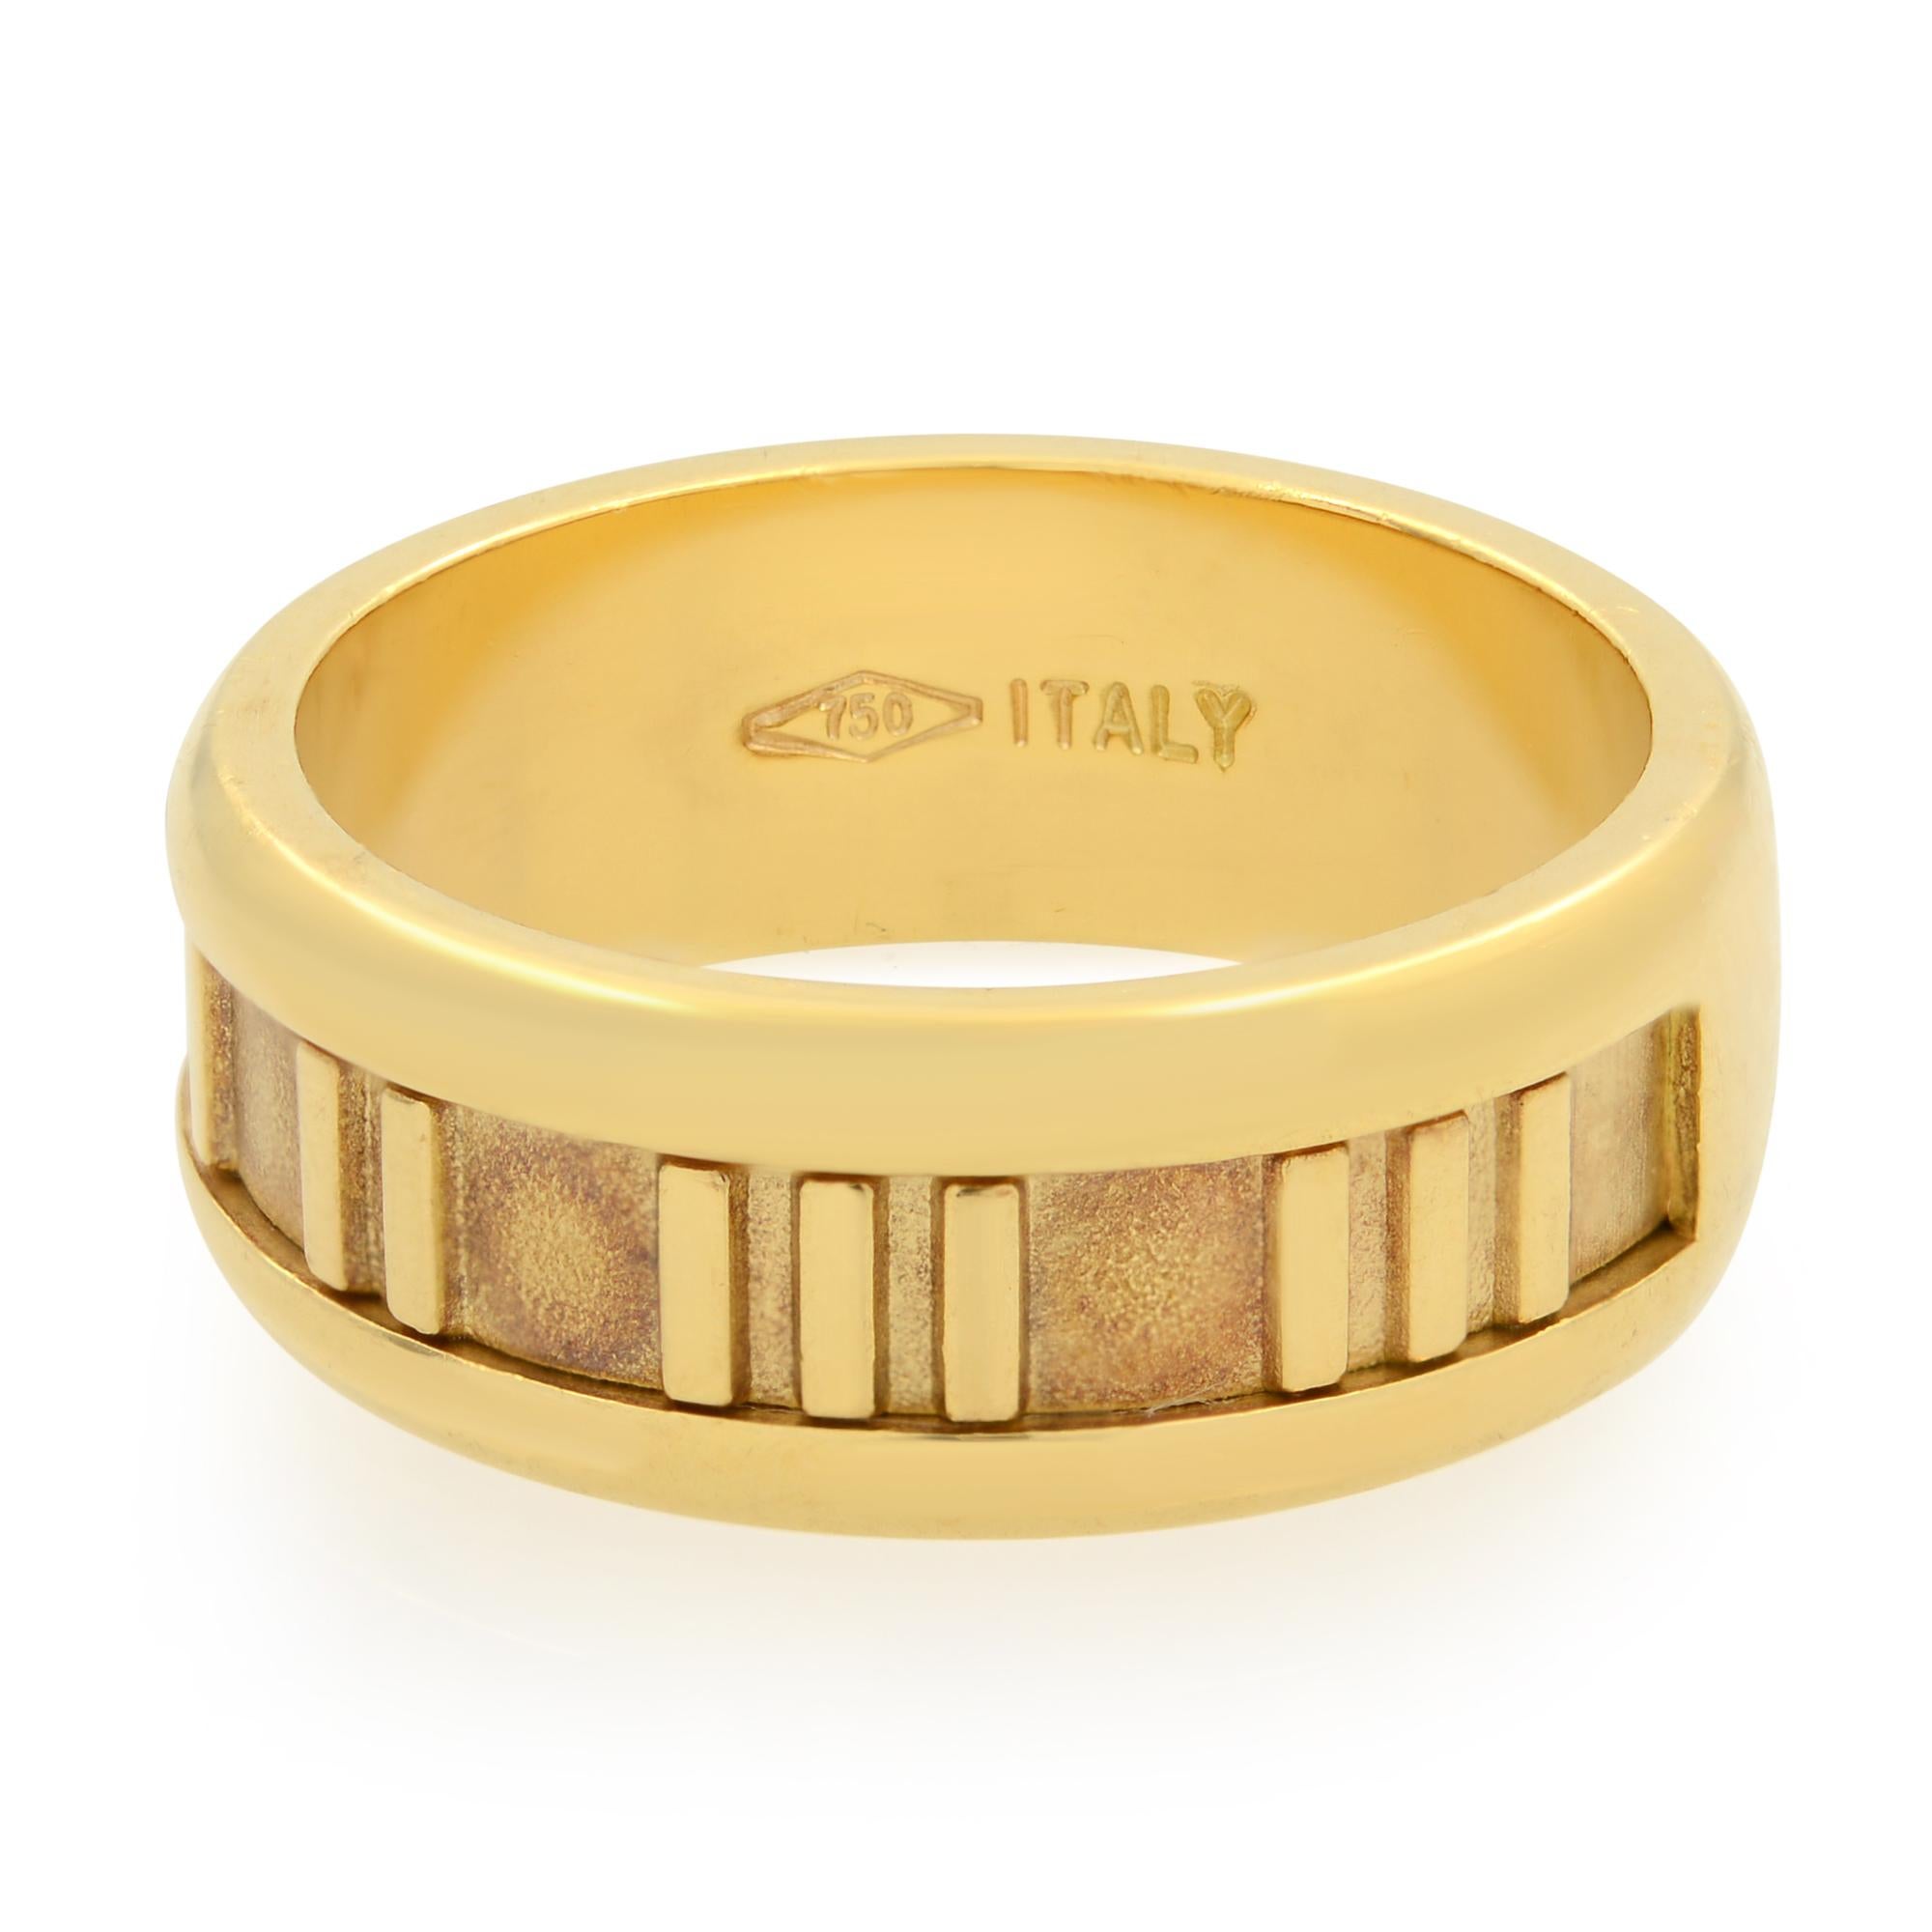 An estate Tiffany & Co. 18K yellow gold ring from Atlas collection. Ring size 6.75. Width of the band is 7.00mm. Weight: 8.90 grams. Great pre owned condition. Original box and papers are not included. Come in our presentation box. 